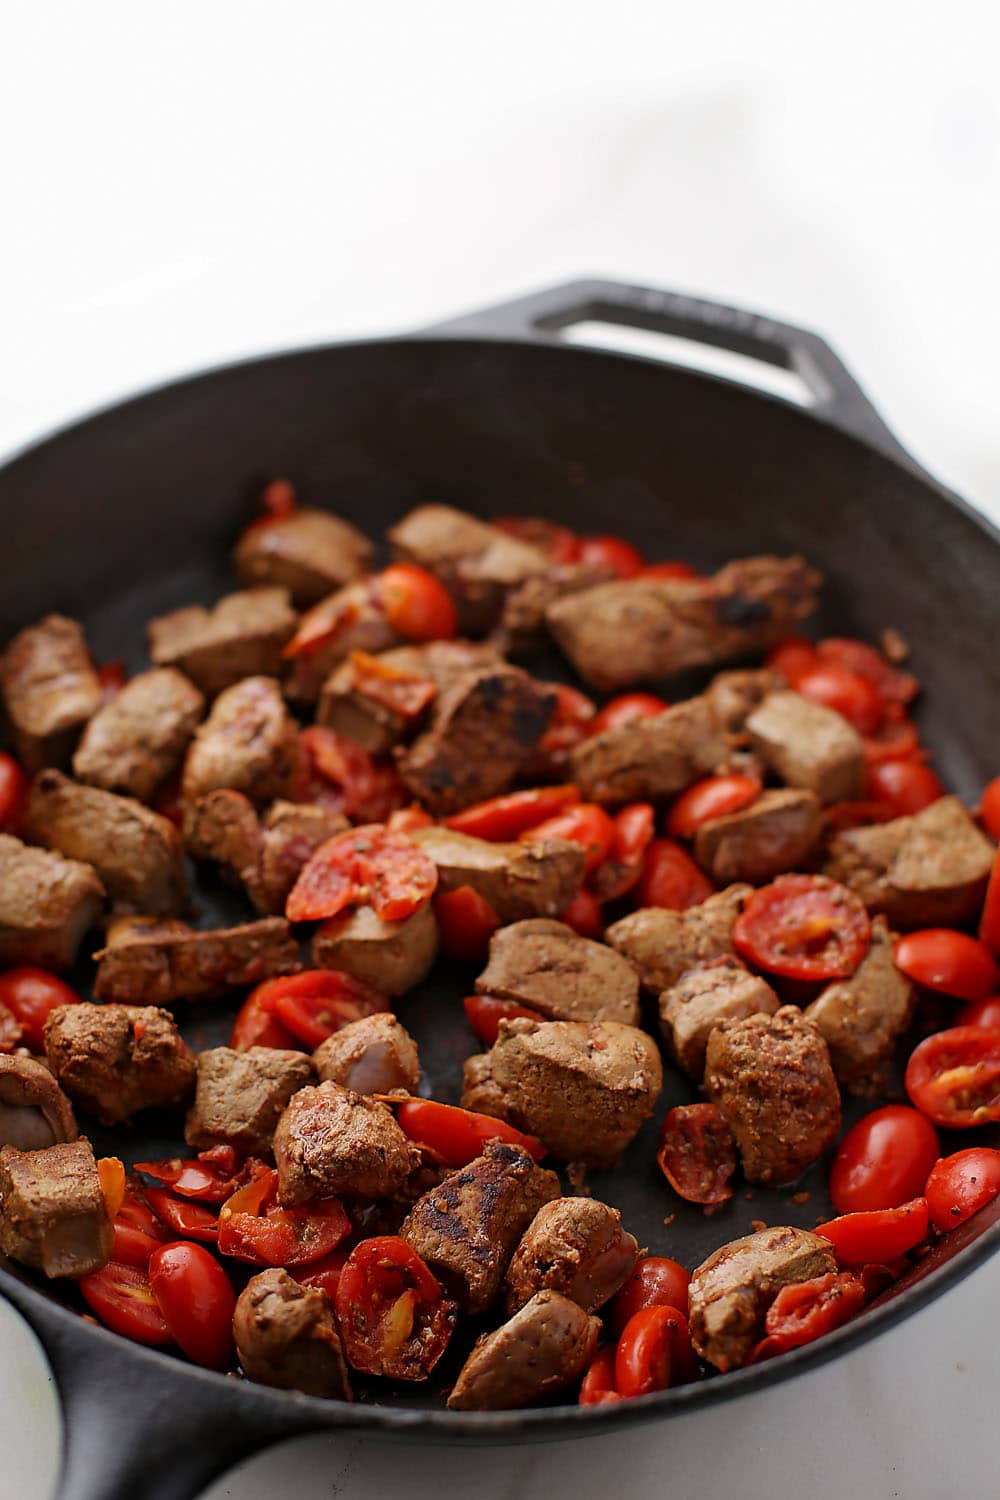 skillet with fried liver and tomatoes